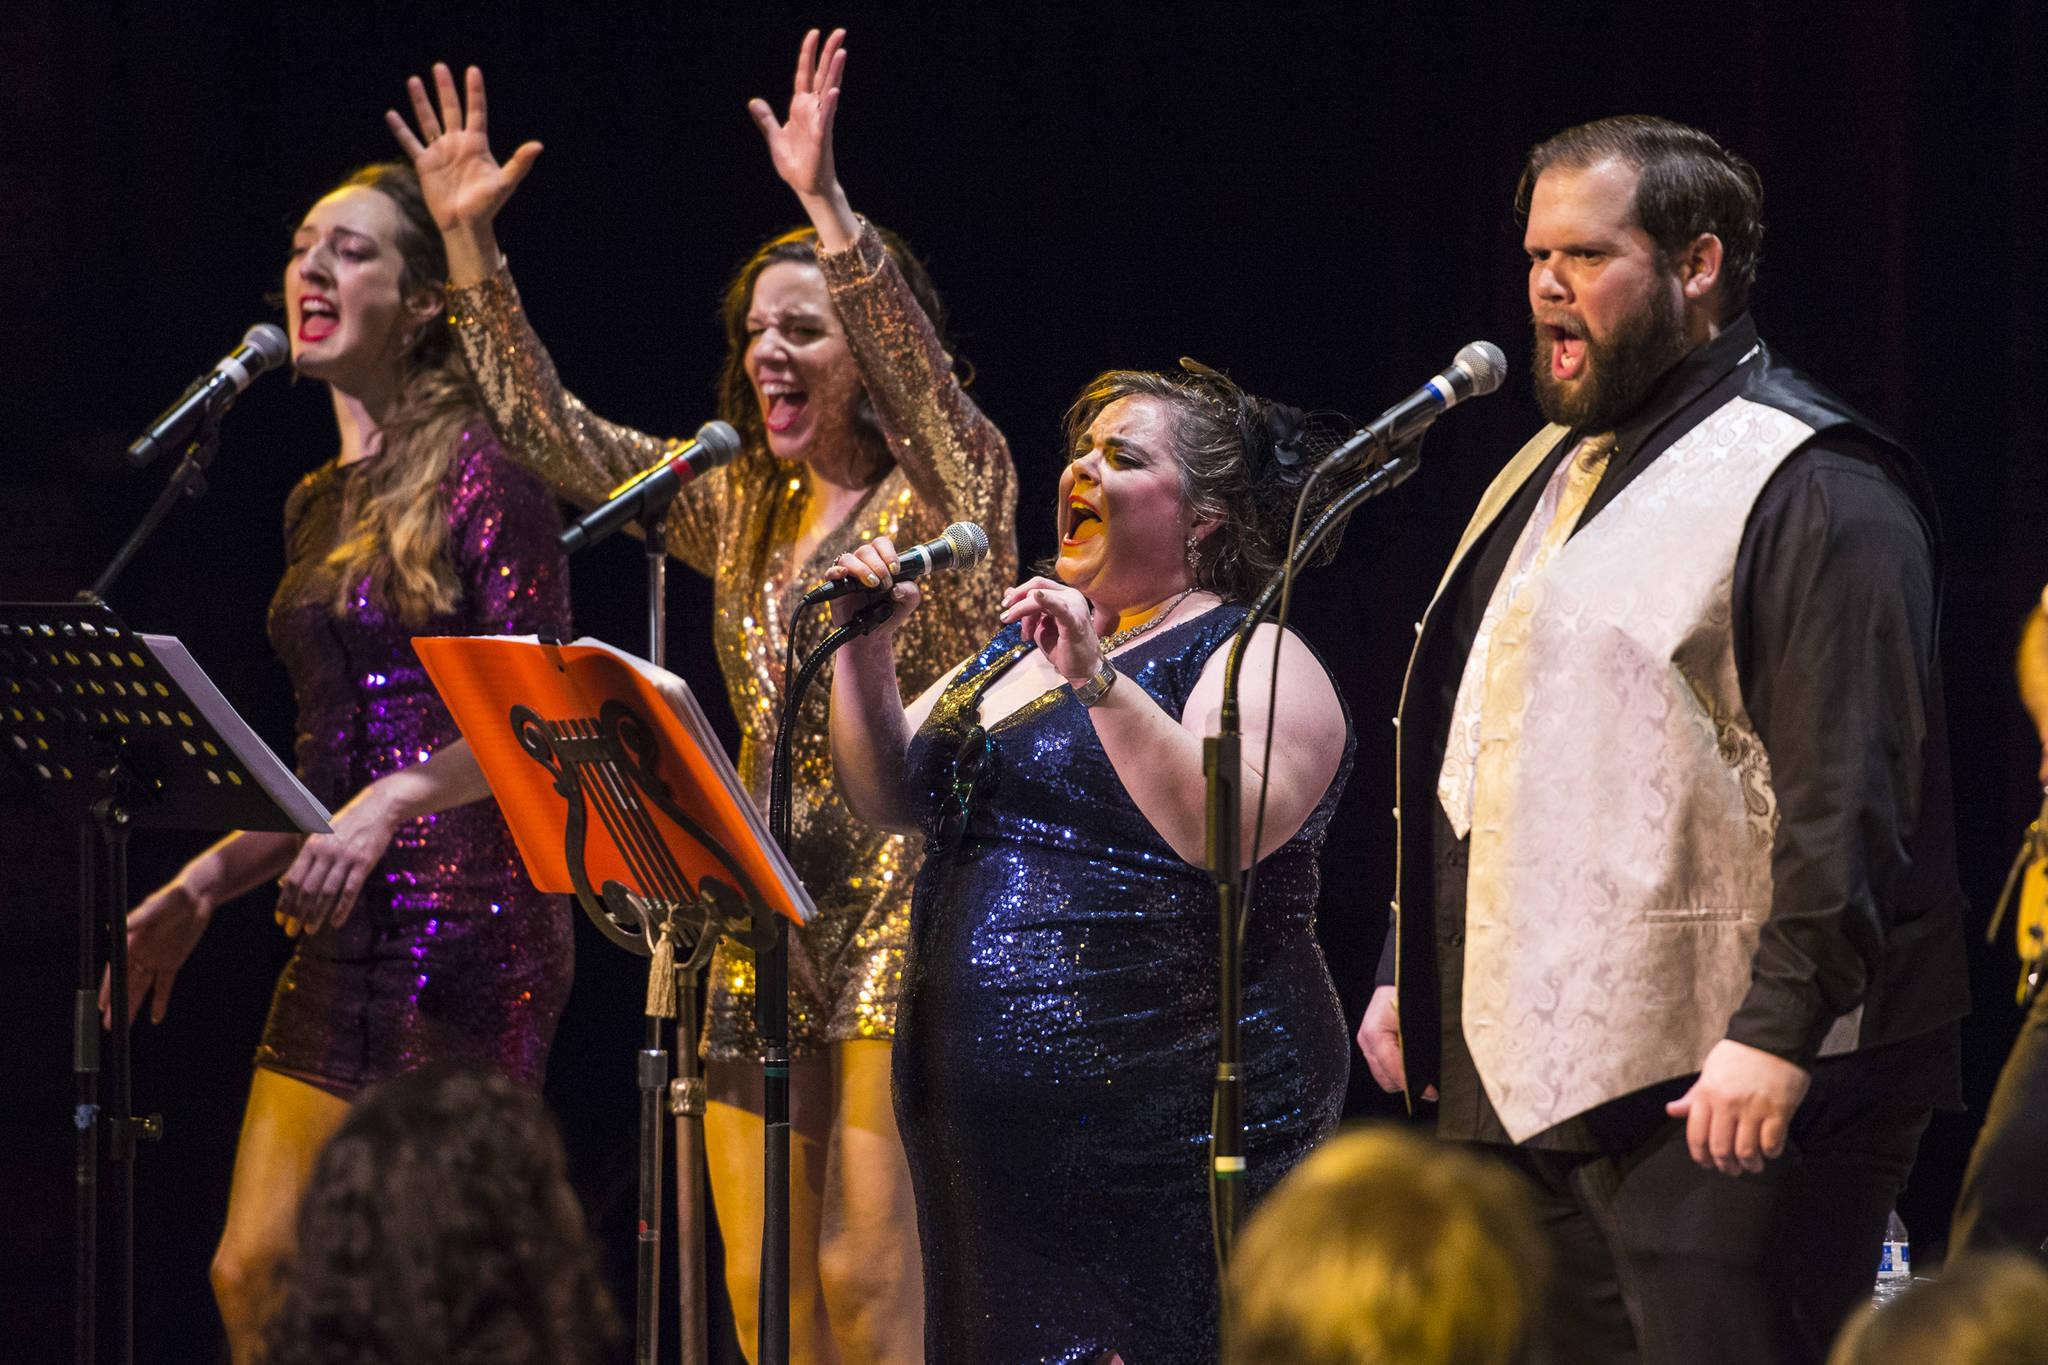 Taylor Vidic, left, Allison Holtkamp, Collette Costa, Mike Gamble, right, perform as Gamble & High Costa Livin’ during the New Year’s Eve Gala at Centennial Hall on Monday, Dec. 31, 2018. The event was a fundraiser for the Juneau Arts and Humanities Council and Juneau Jazz & Classics. (Michael Penn | Juneau Empire)